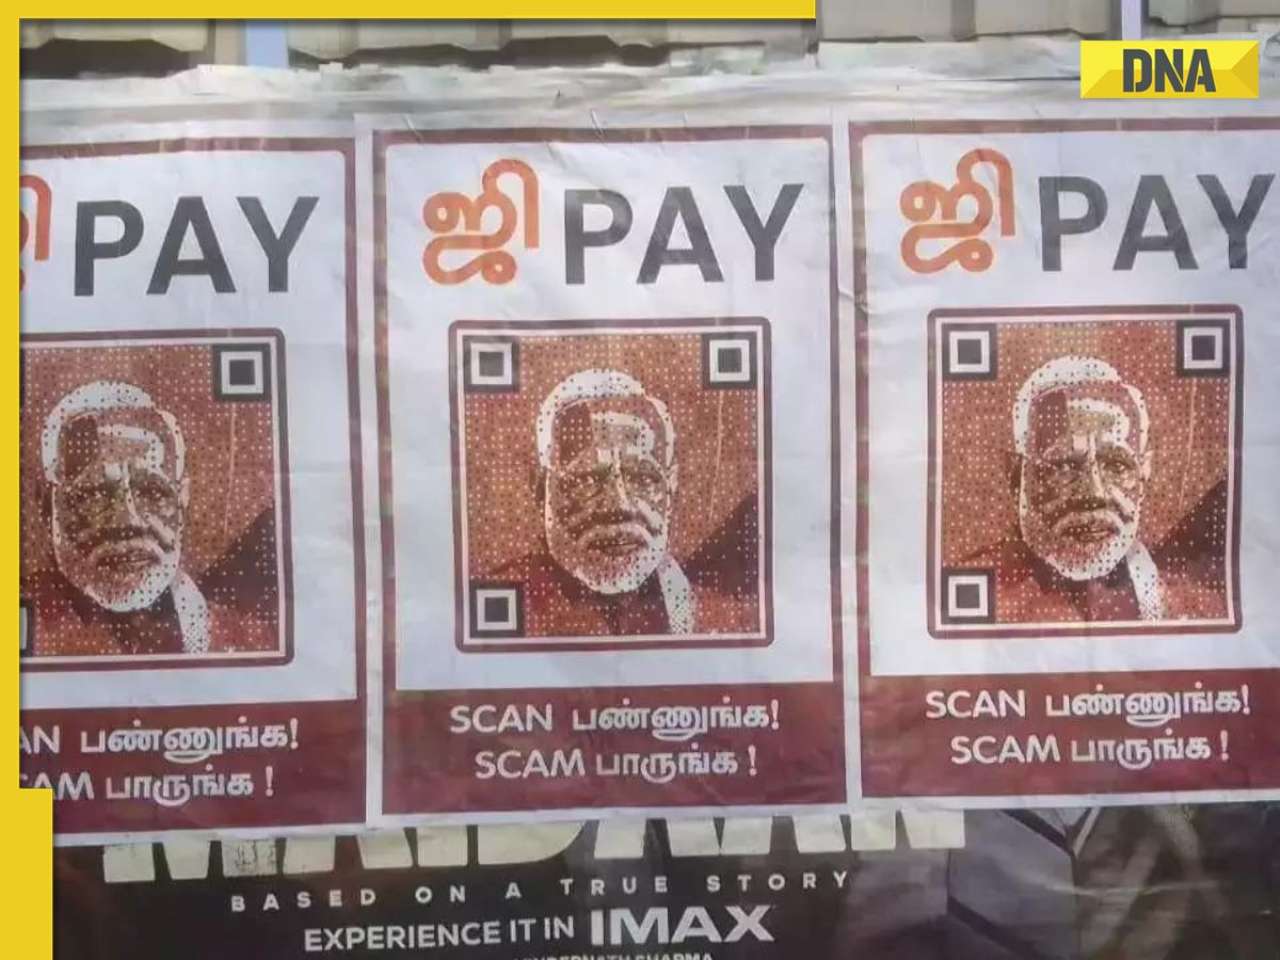 'Scan to see scam': DMK's 'Ji-Pay' poster attack on PM Modi